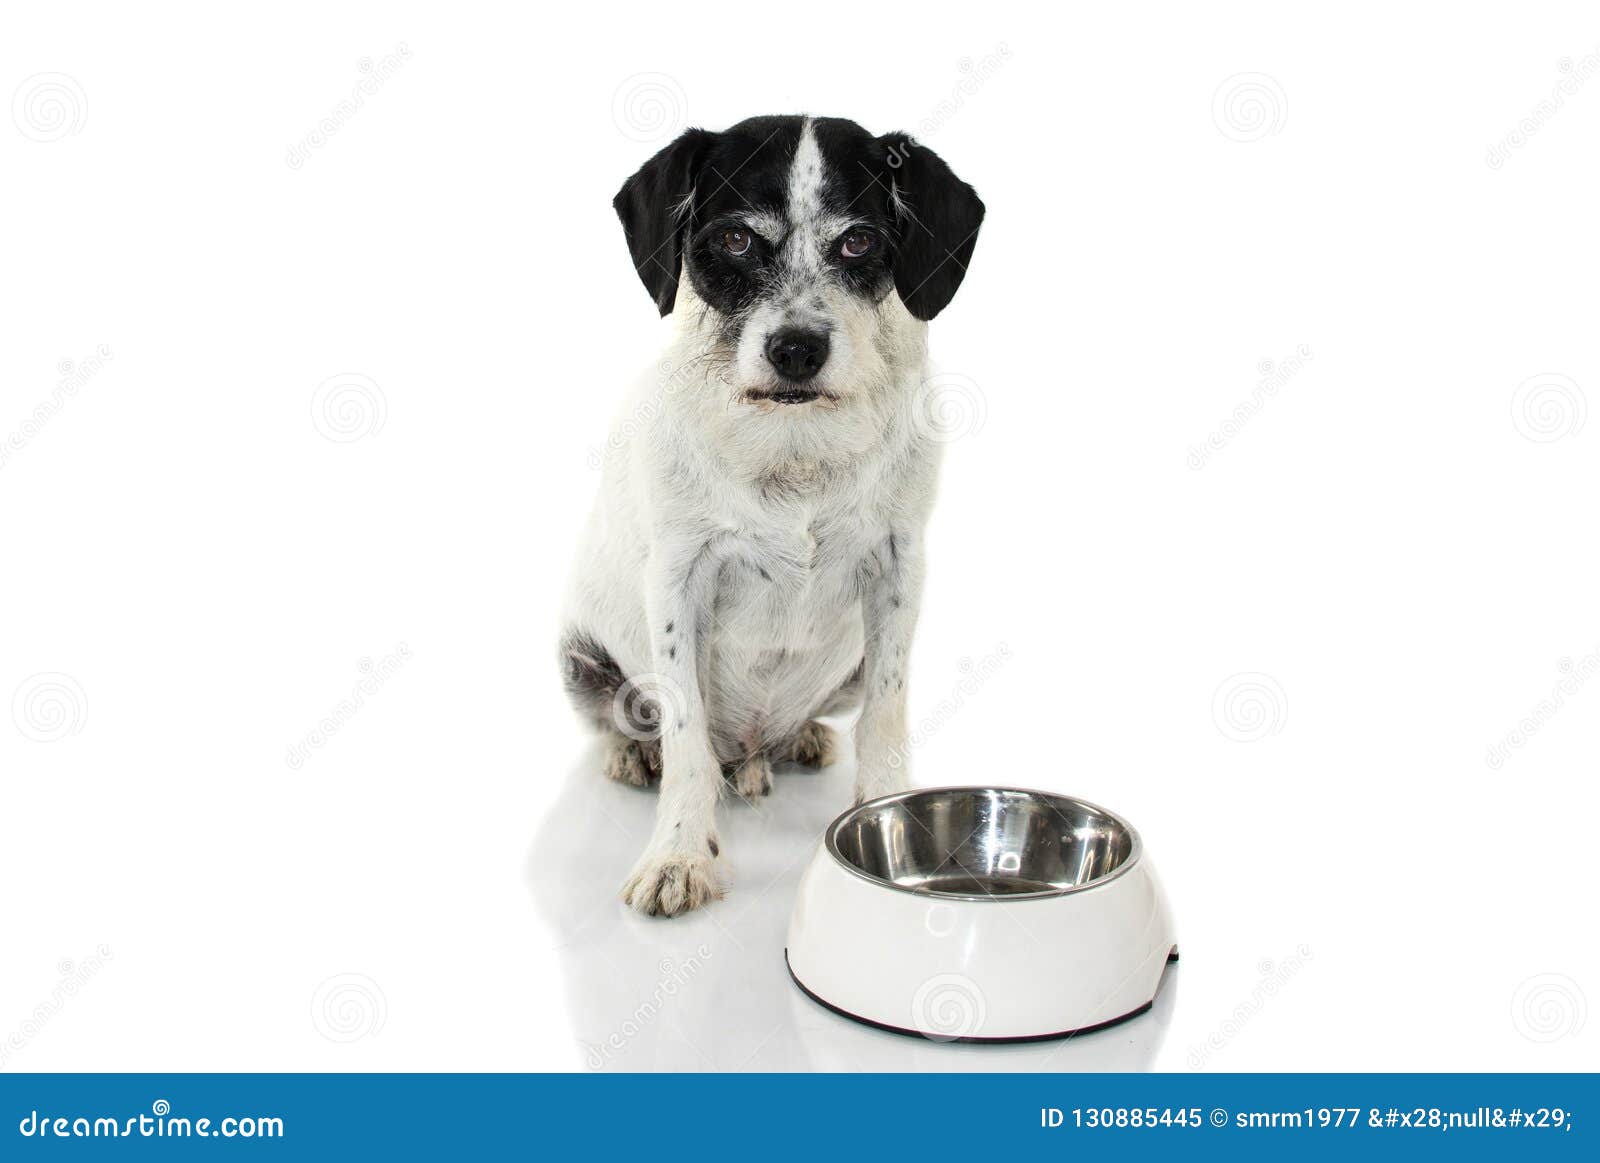 FUNNY DOG AFTER EAT FOOD WITH ANGRY EXPRESSION, ISOLATED